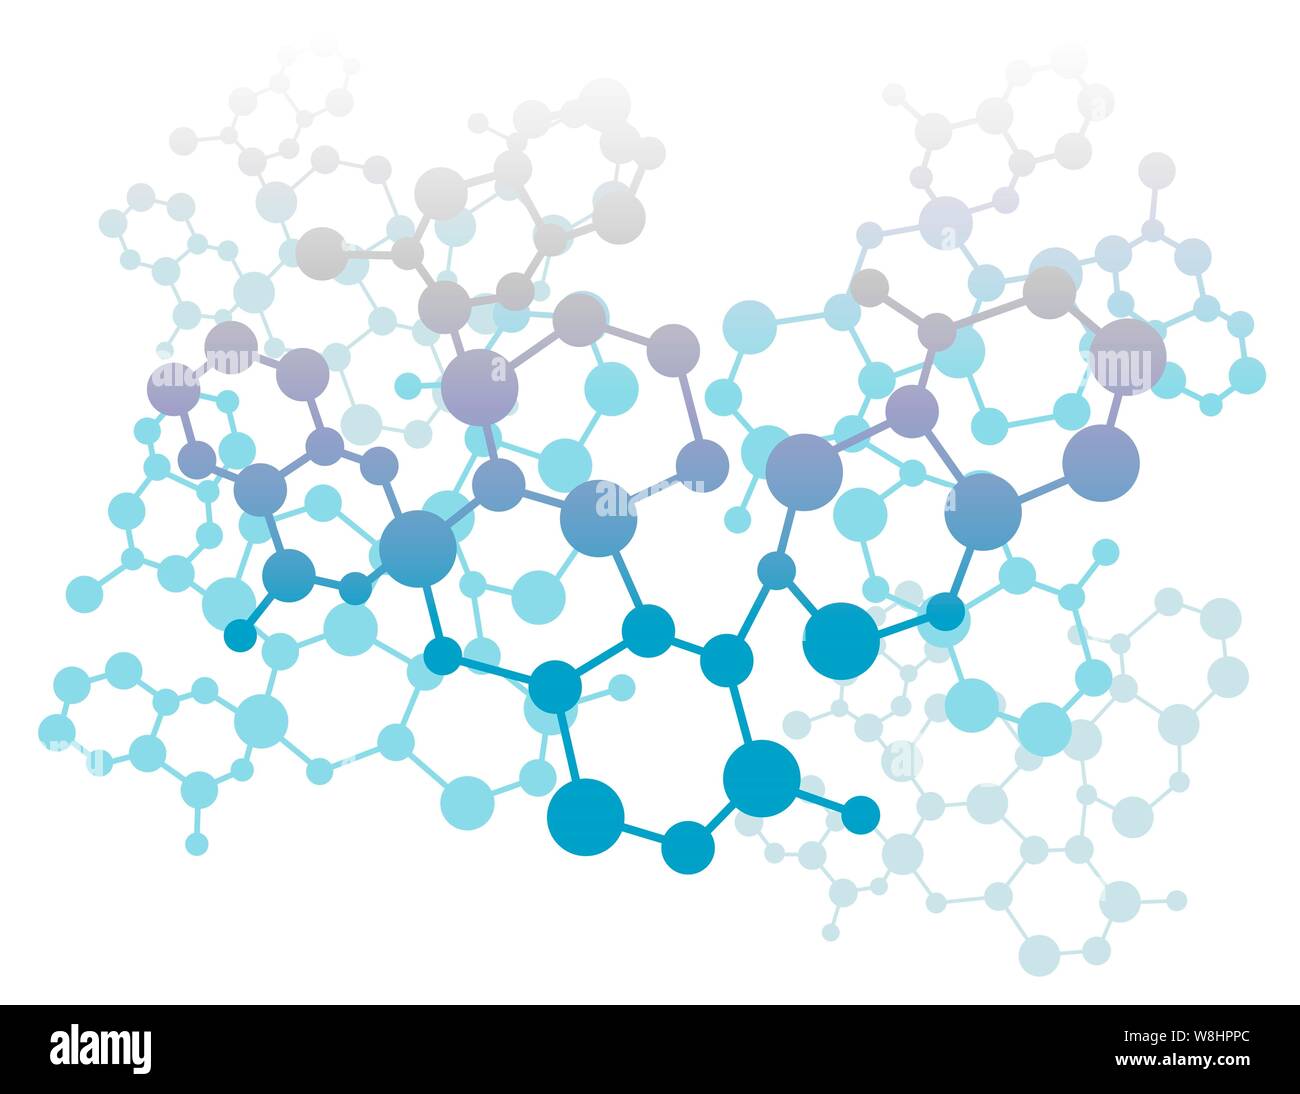 Abstract background with molecular icons. Stock Photo